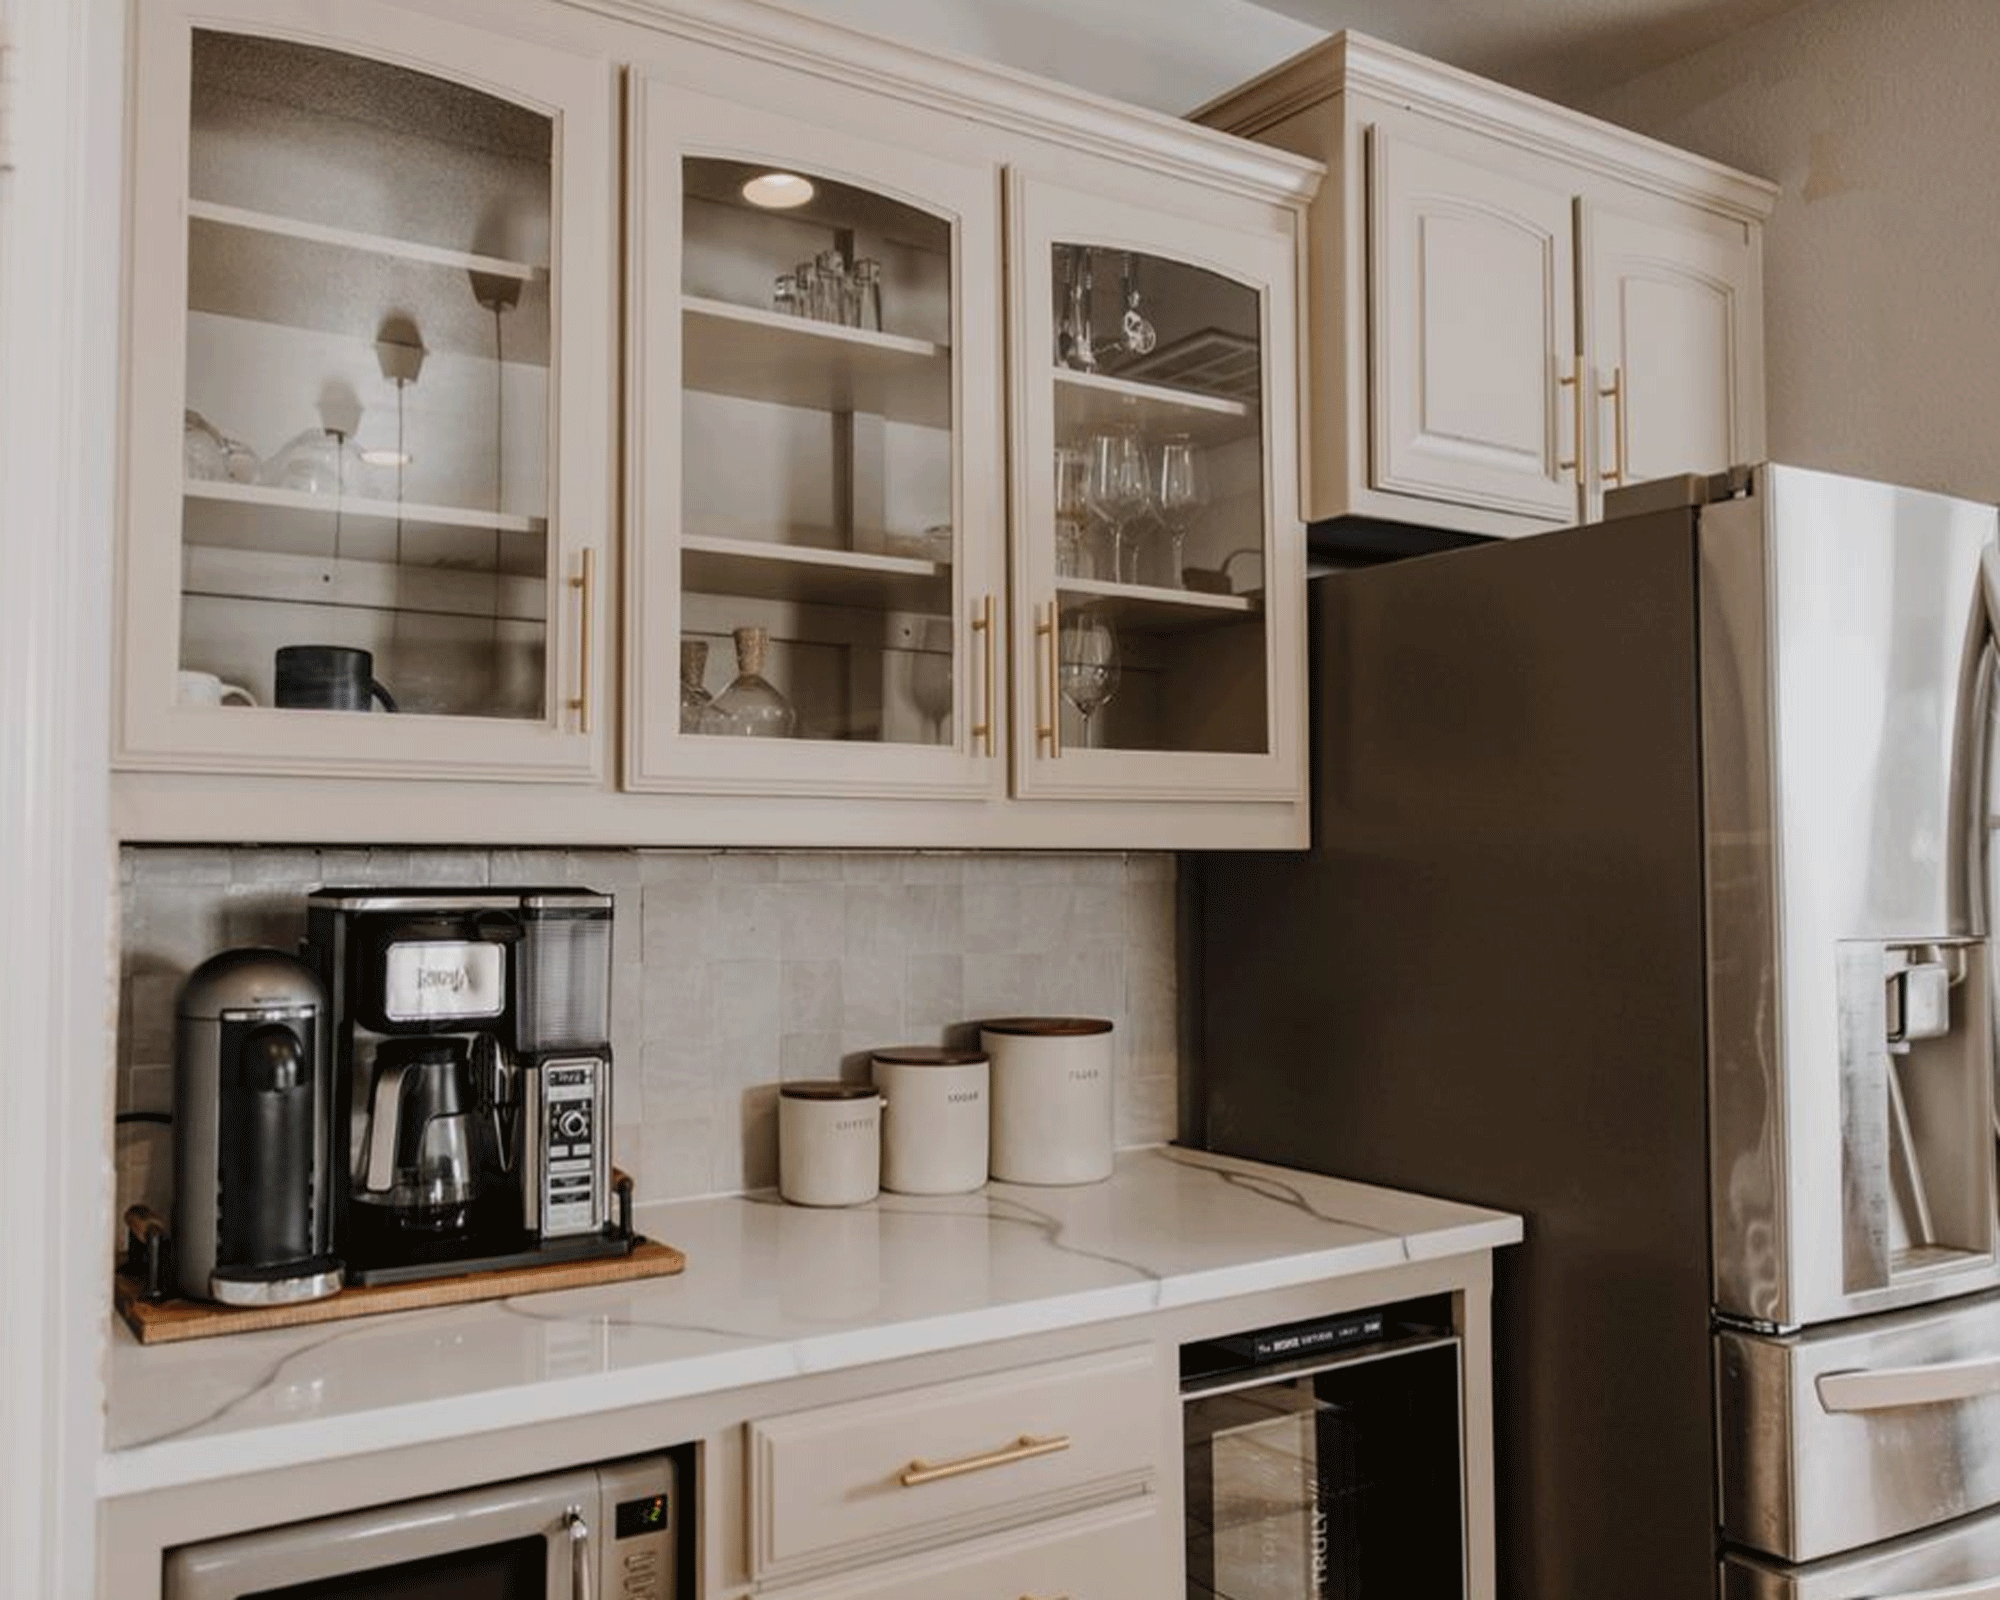 close-up view of a modern all-white kitchen, with a large coffee machine, pots for tea and coffee, cabinets with glass doors, and a large stainless steel fridge